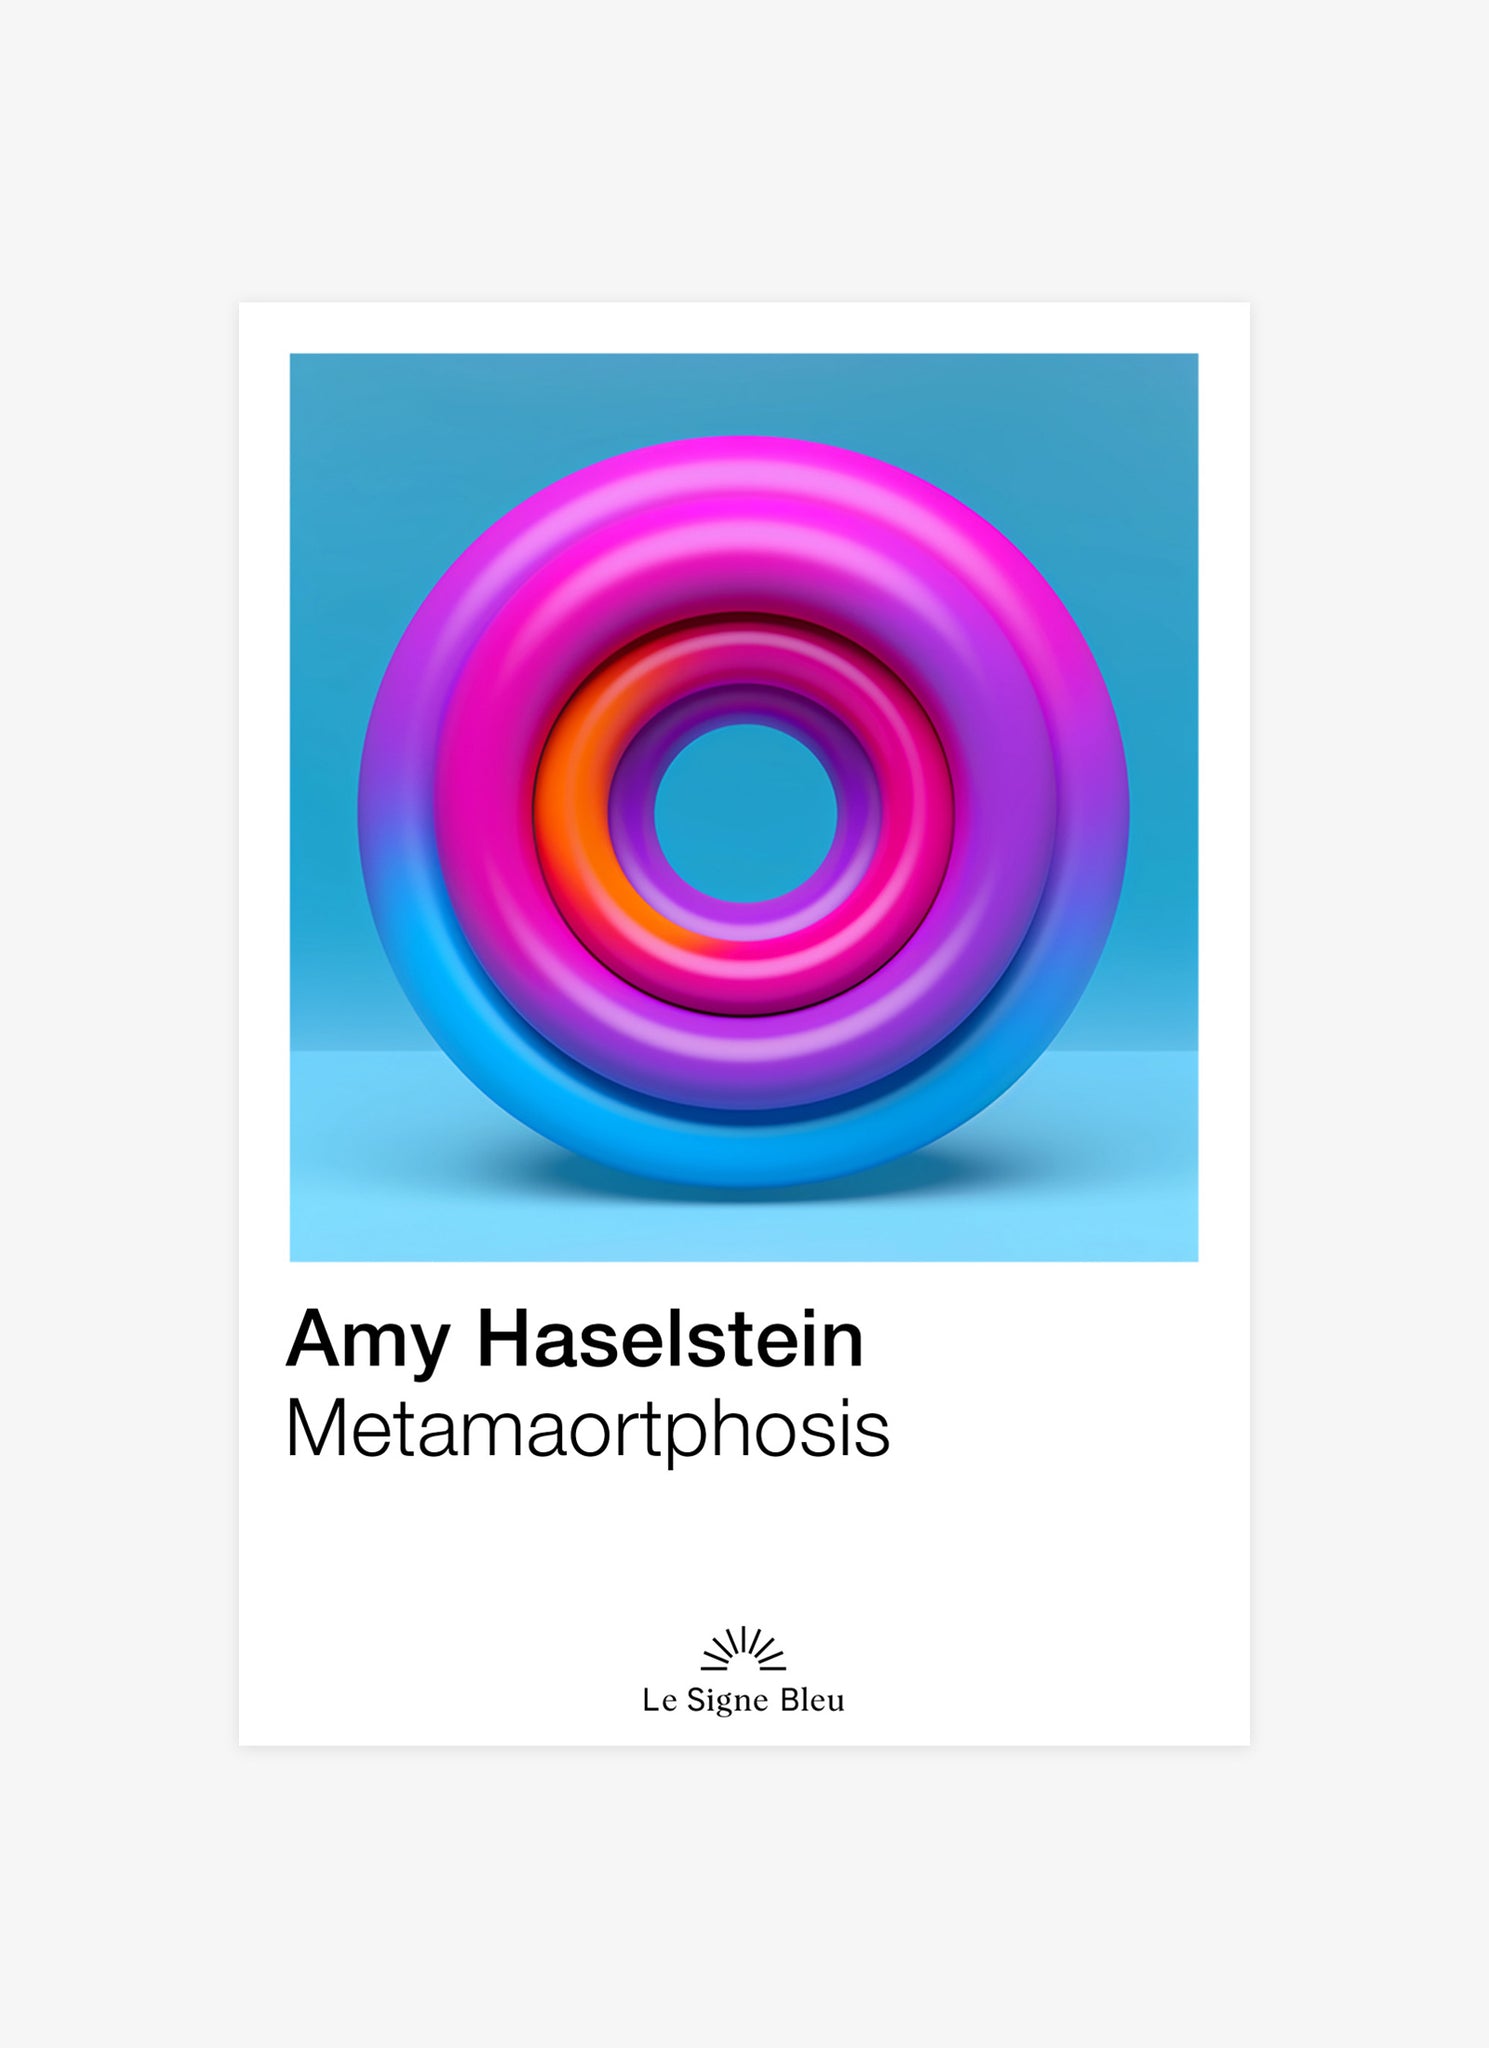 Amy Haselstein - Metamorphosis 01 Poster (open edition poster)